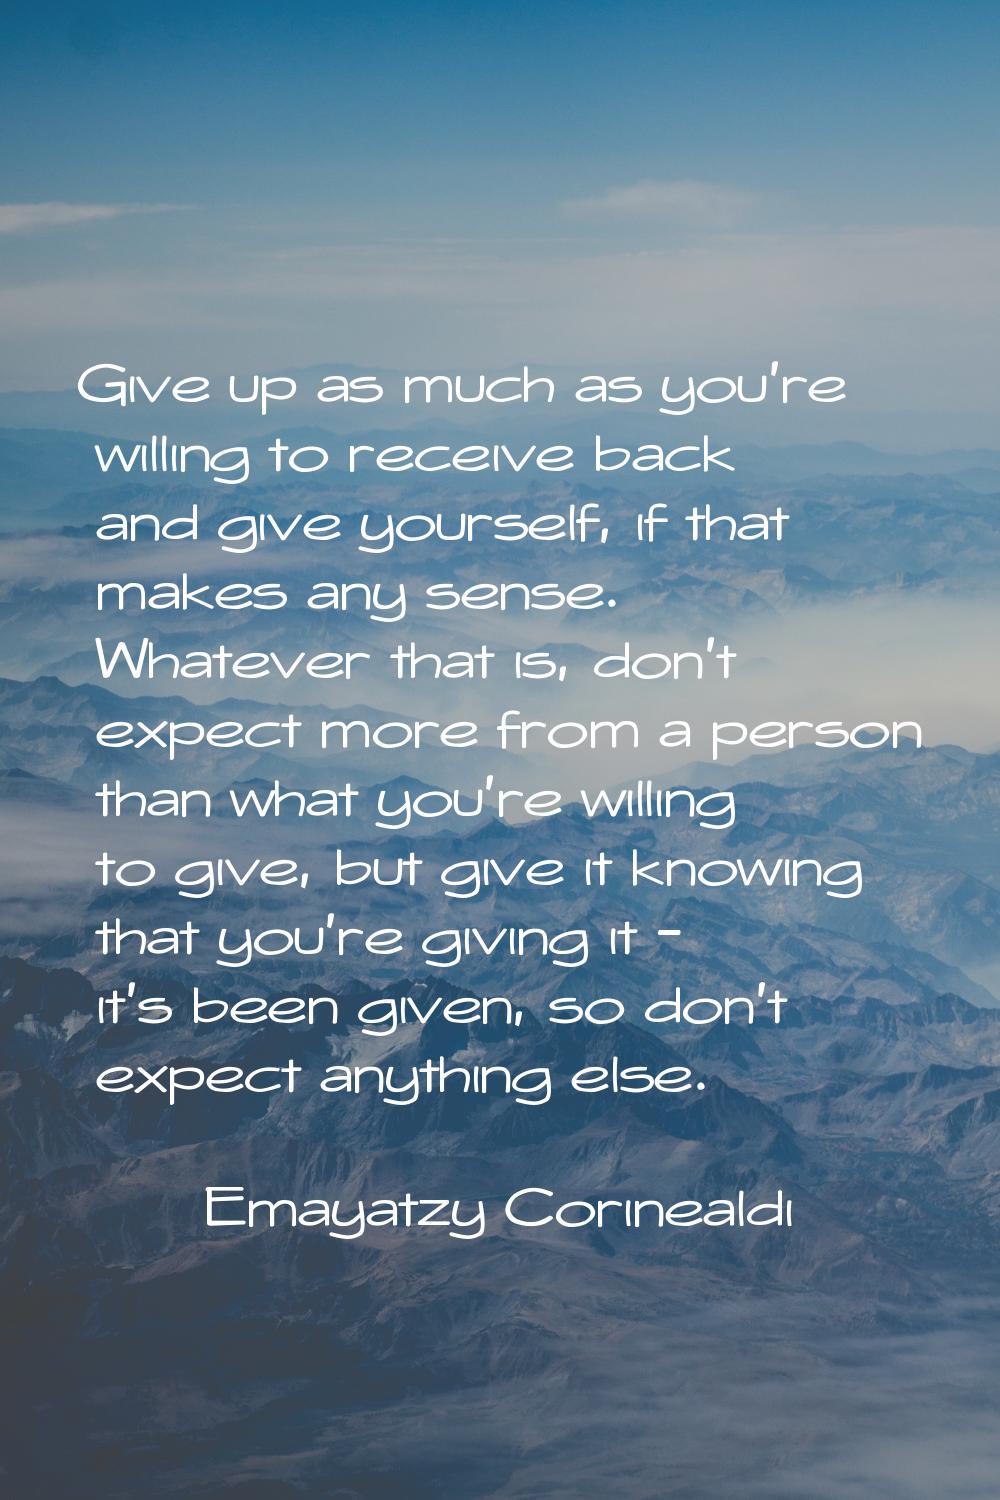 Give up as much as you're willing to receive back and give yourself, if that makes any sense. Whate